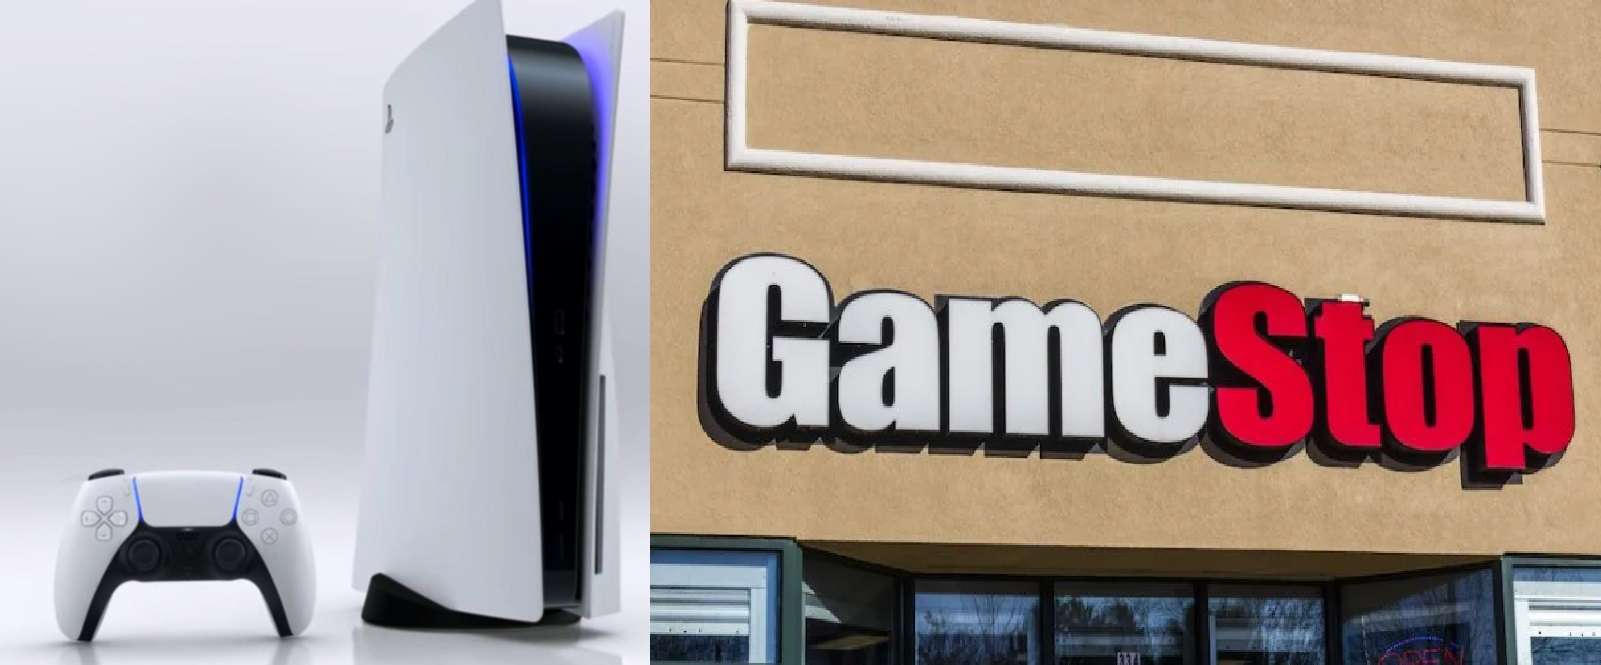 Gamestop Website Crashes Because of PS5 Preorders: Gamestop Activates DDos Protection After PS5 Preorder Traffic Crashes Their Website